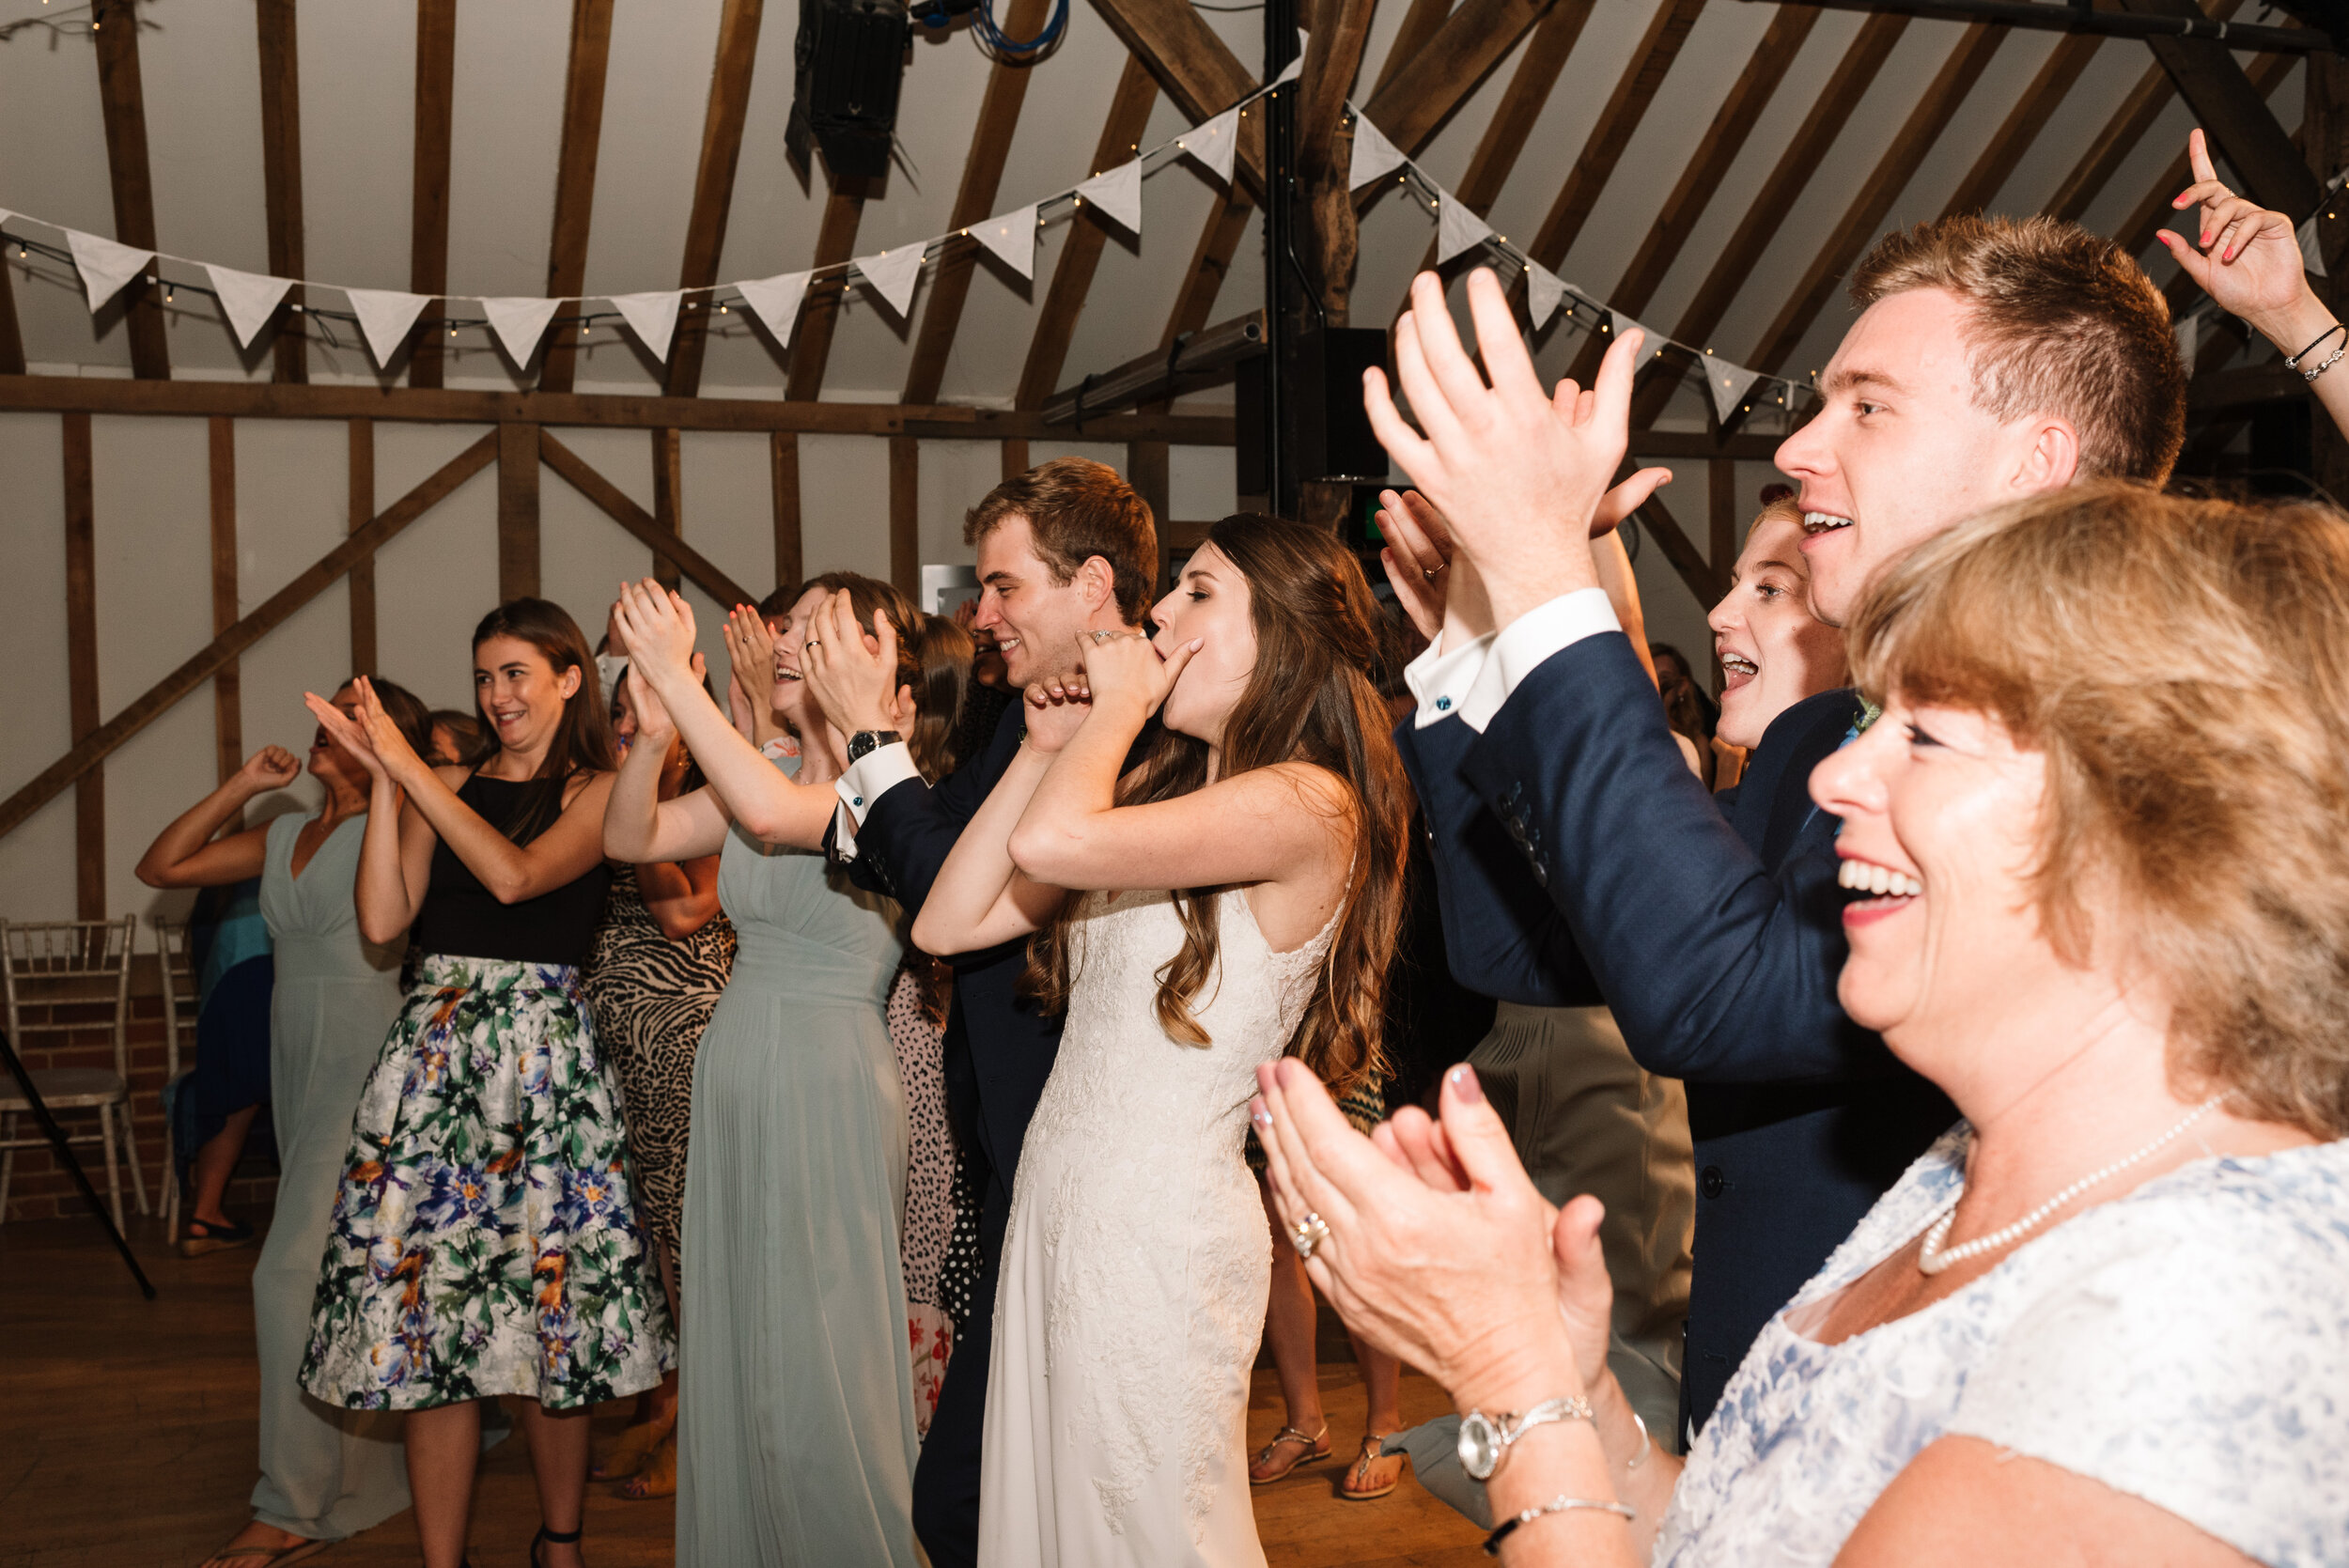 Bride and groom clapping for wedding band at Hanger Farm